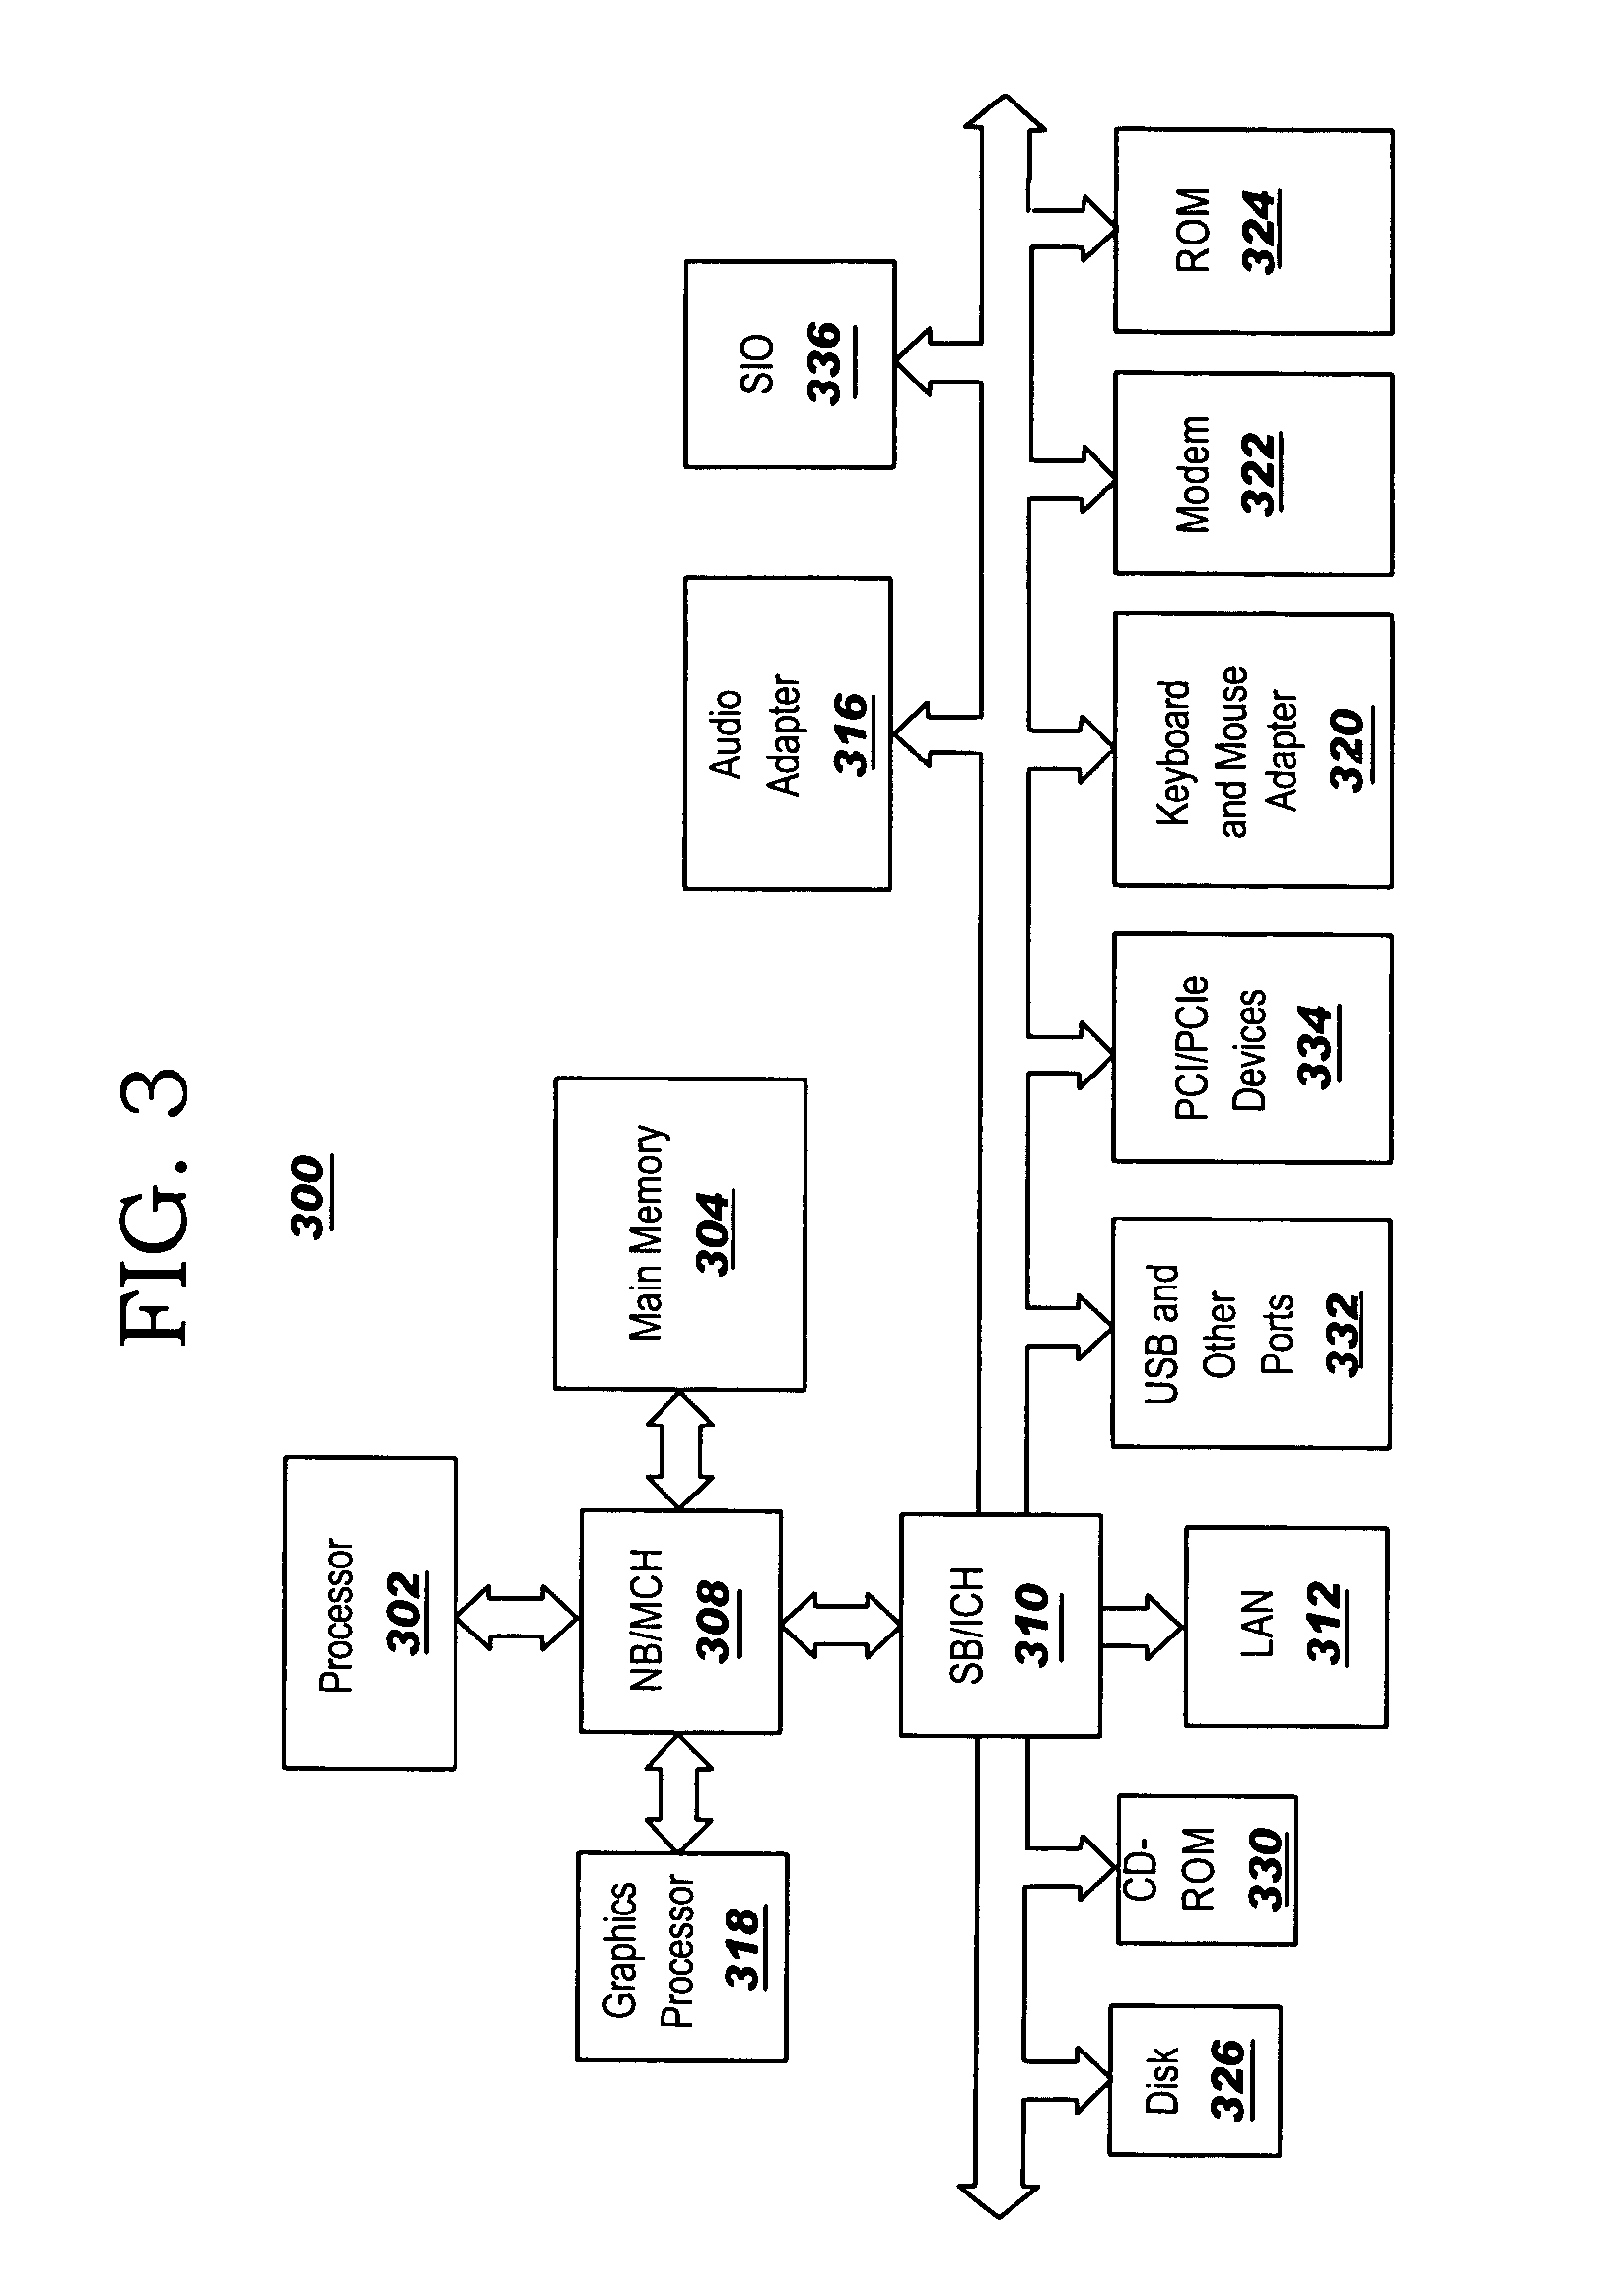 Method to effectively collect data from systems that consists of dynamic sub-systems